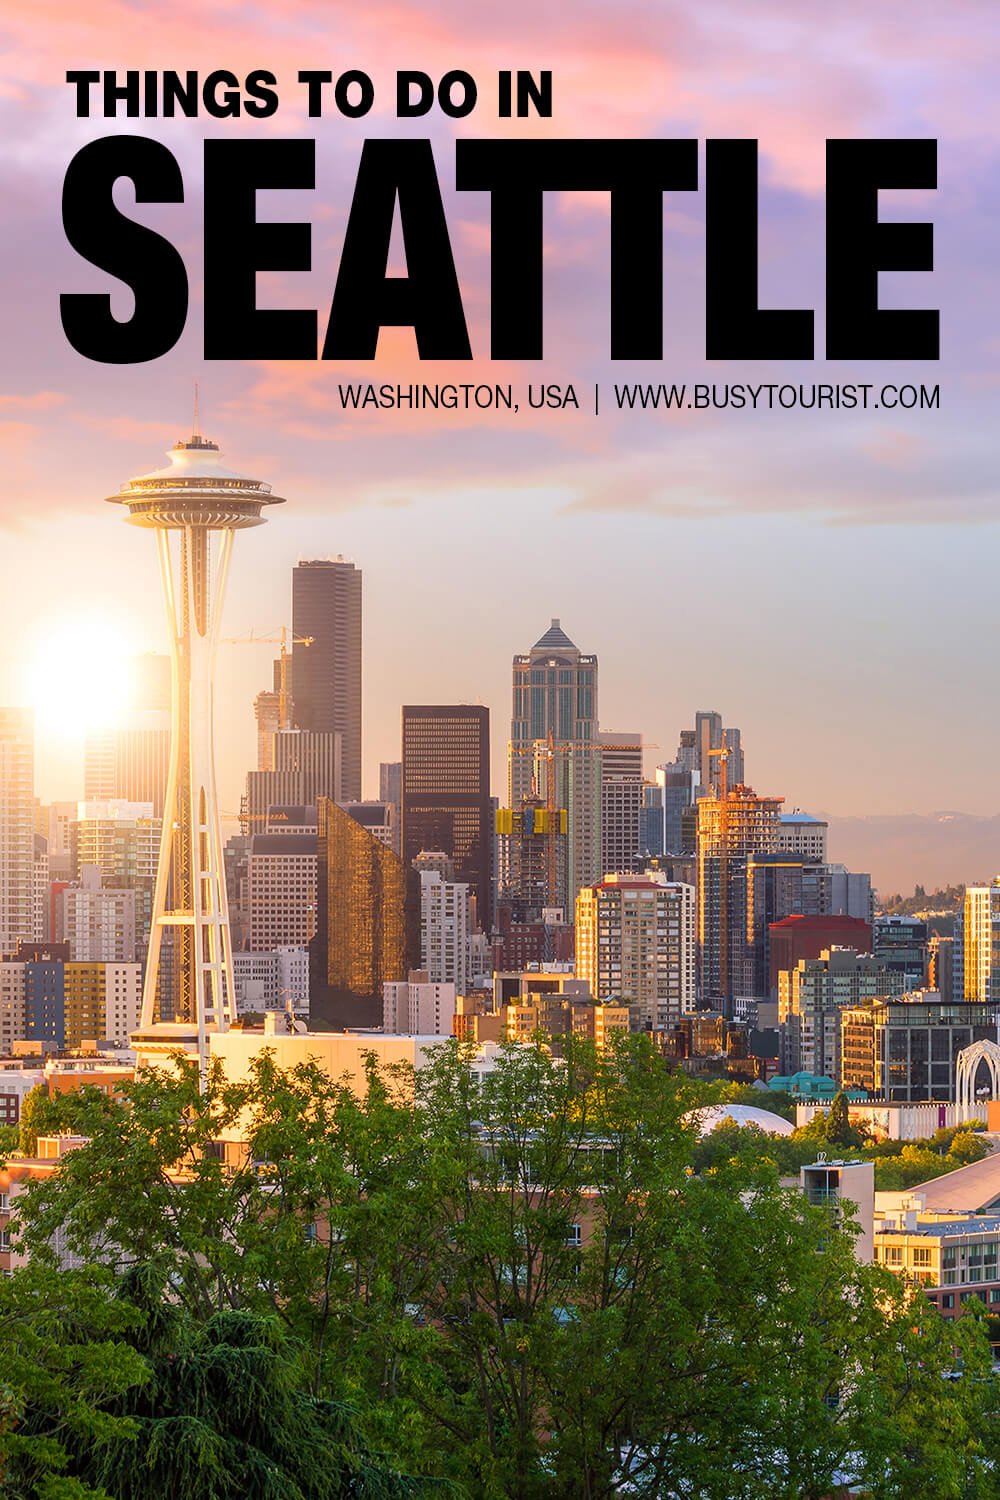 59 Best & Fun Things To Do In Seattle (WA) Attractions & Activities